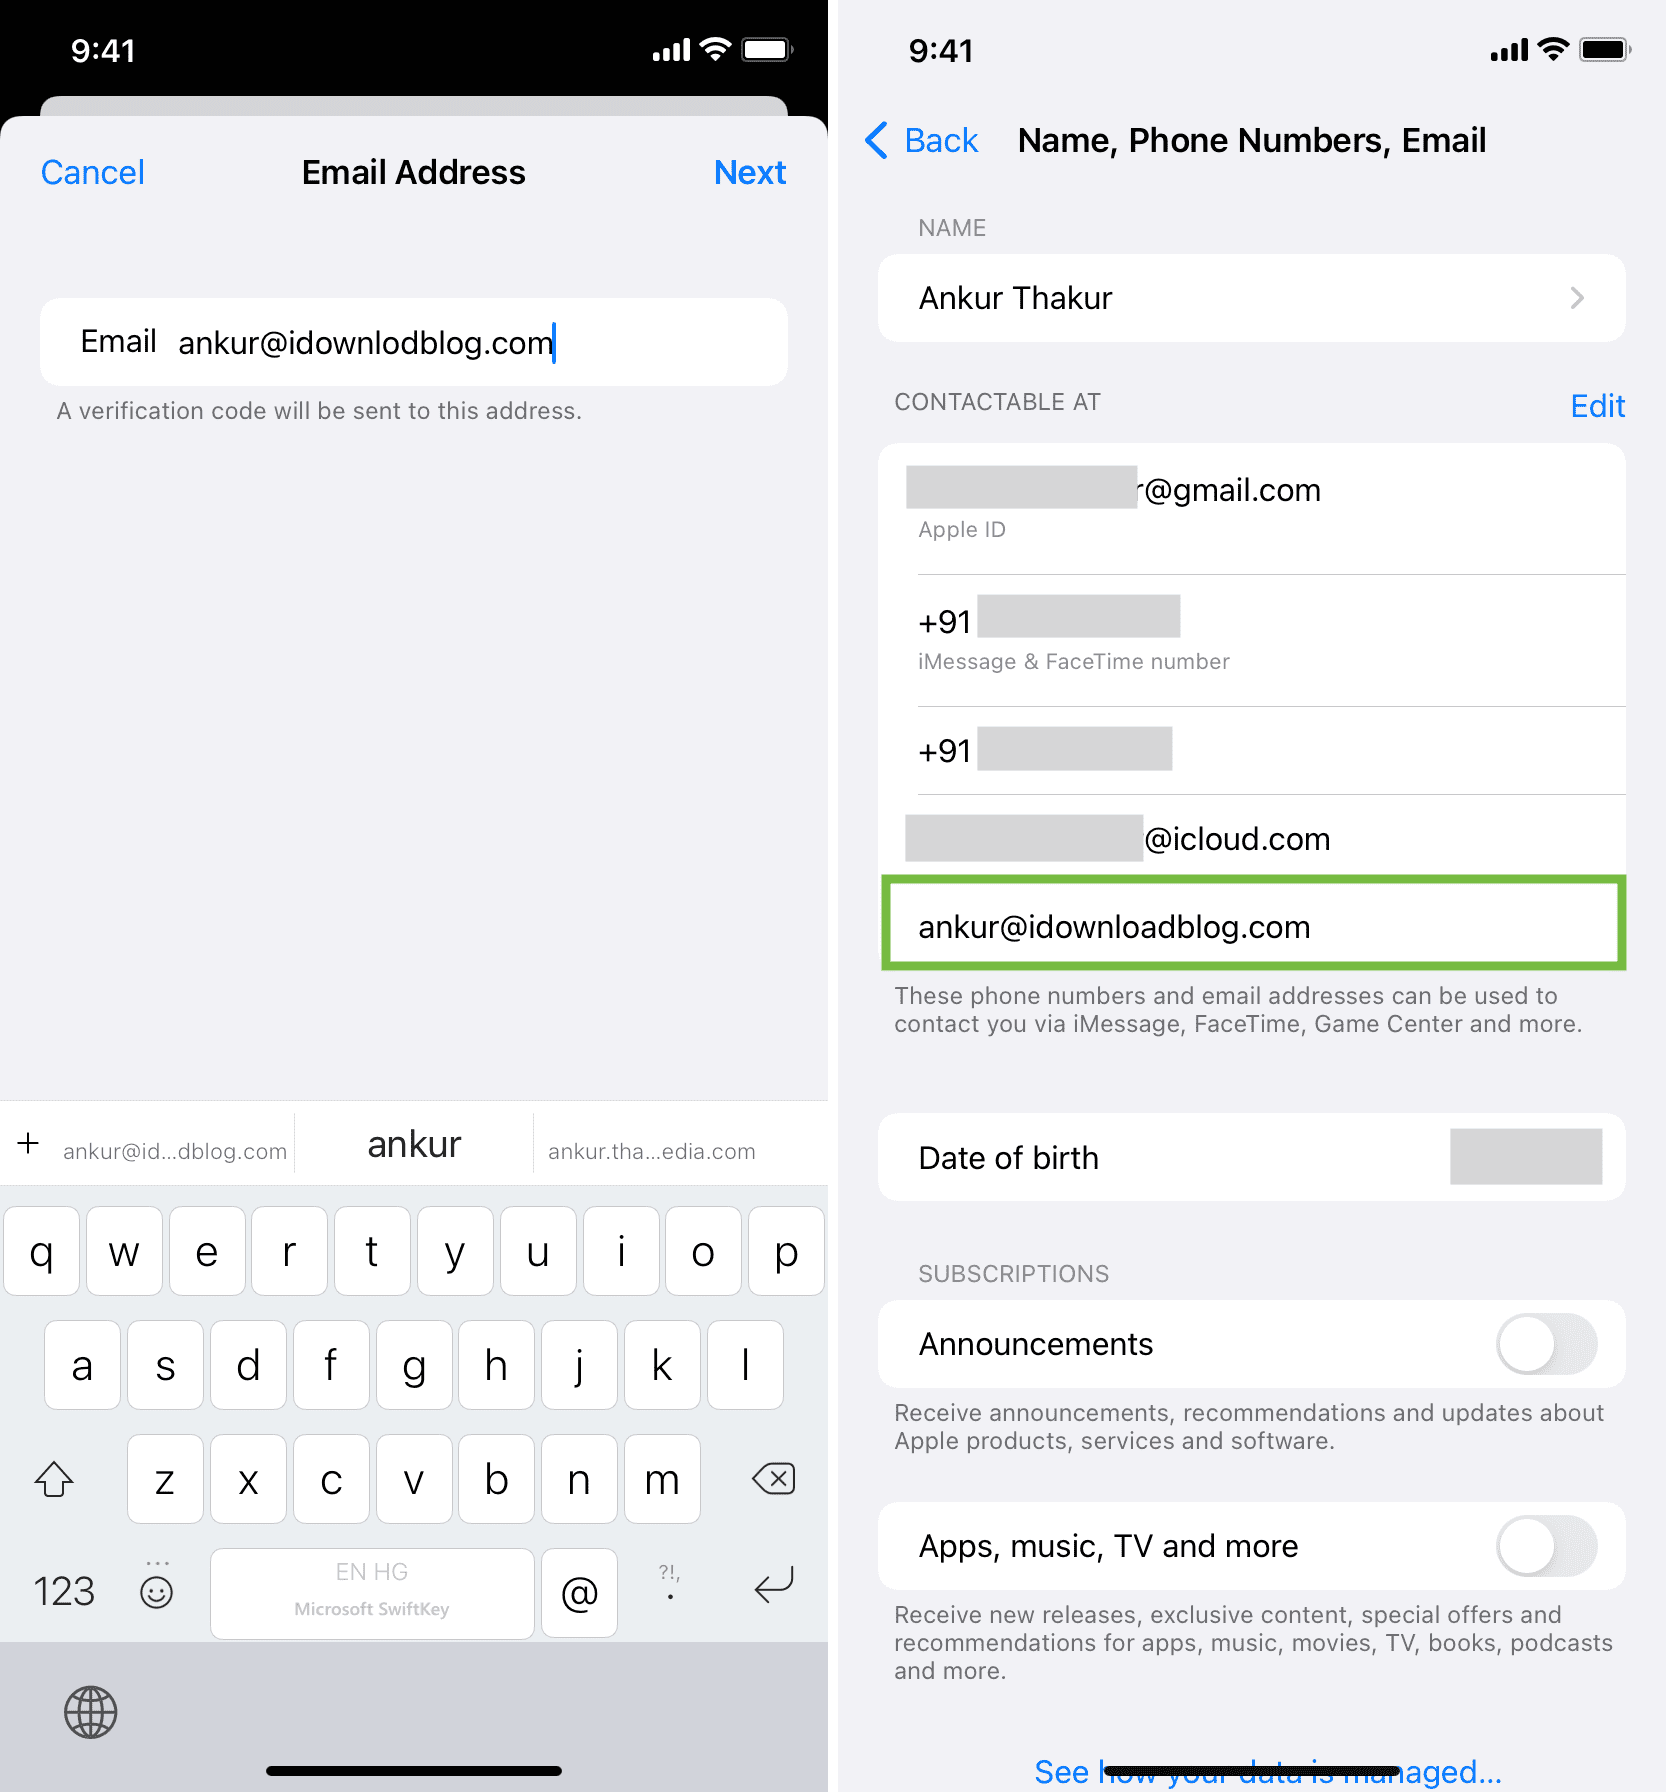 New Email Address added to Apple ID